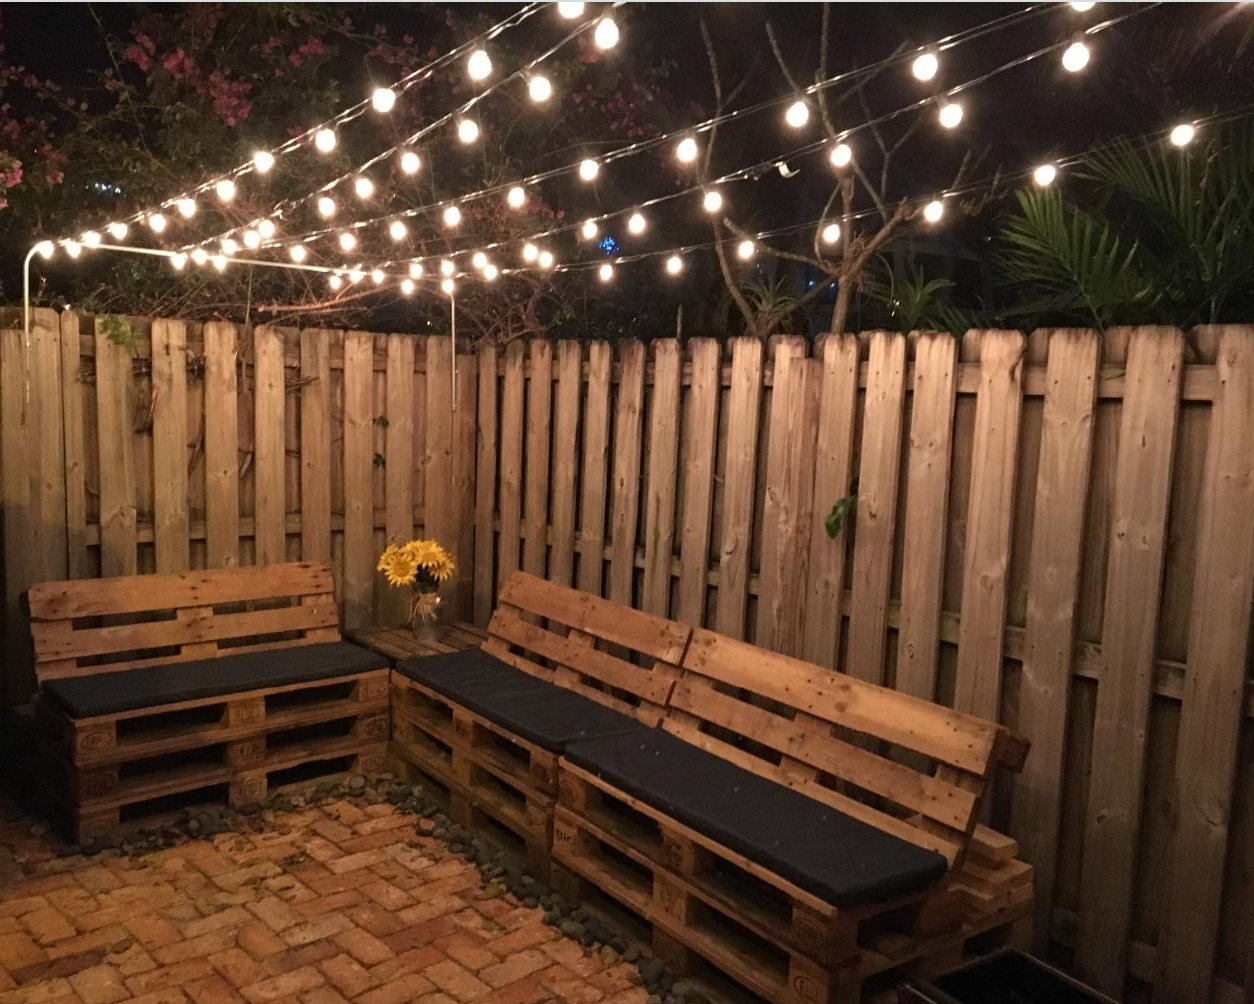 Reviewer photo of the lights strung up in their backyard patio